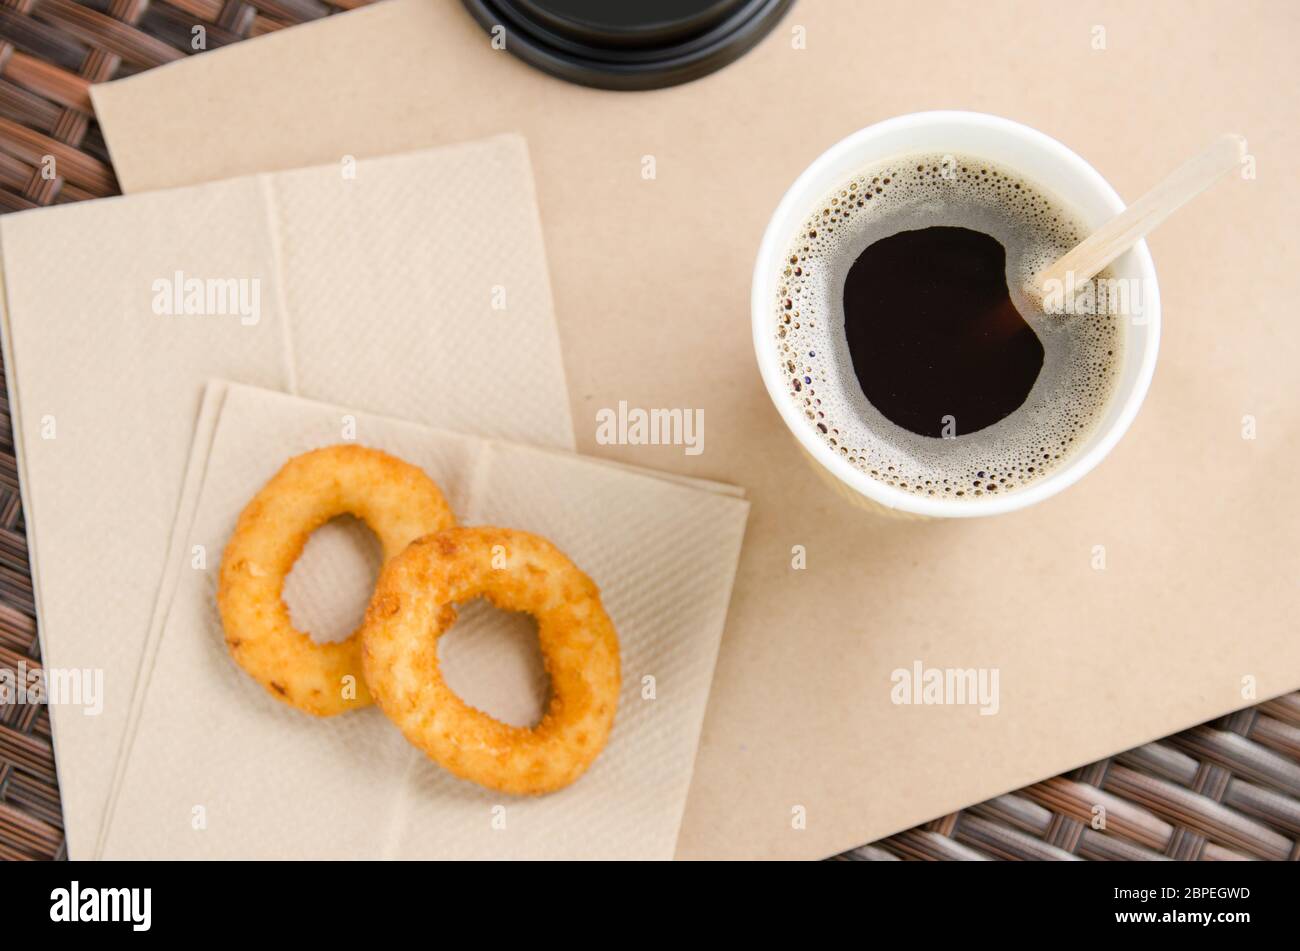 coffee in a paper cup next to onion rings on a paper napkin. Unhealthy fast food. Stock Photo